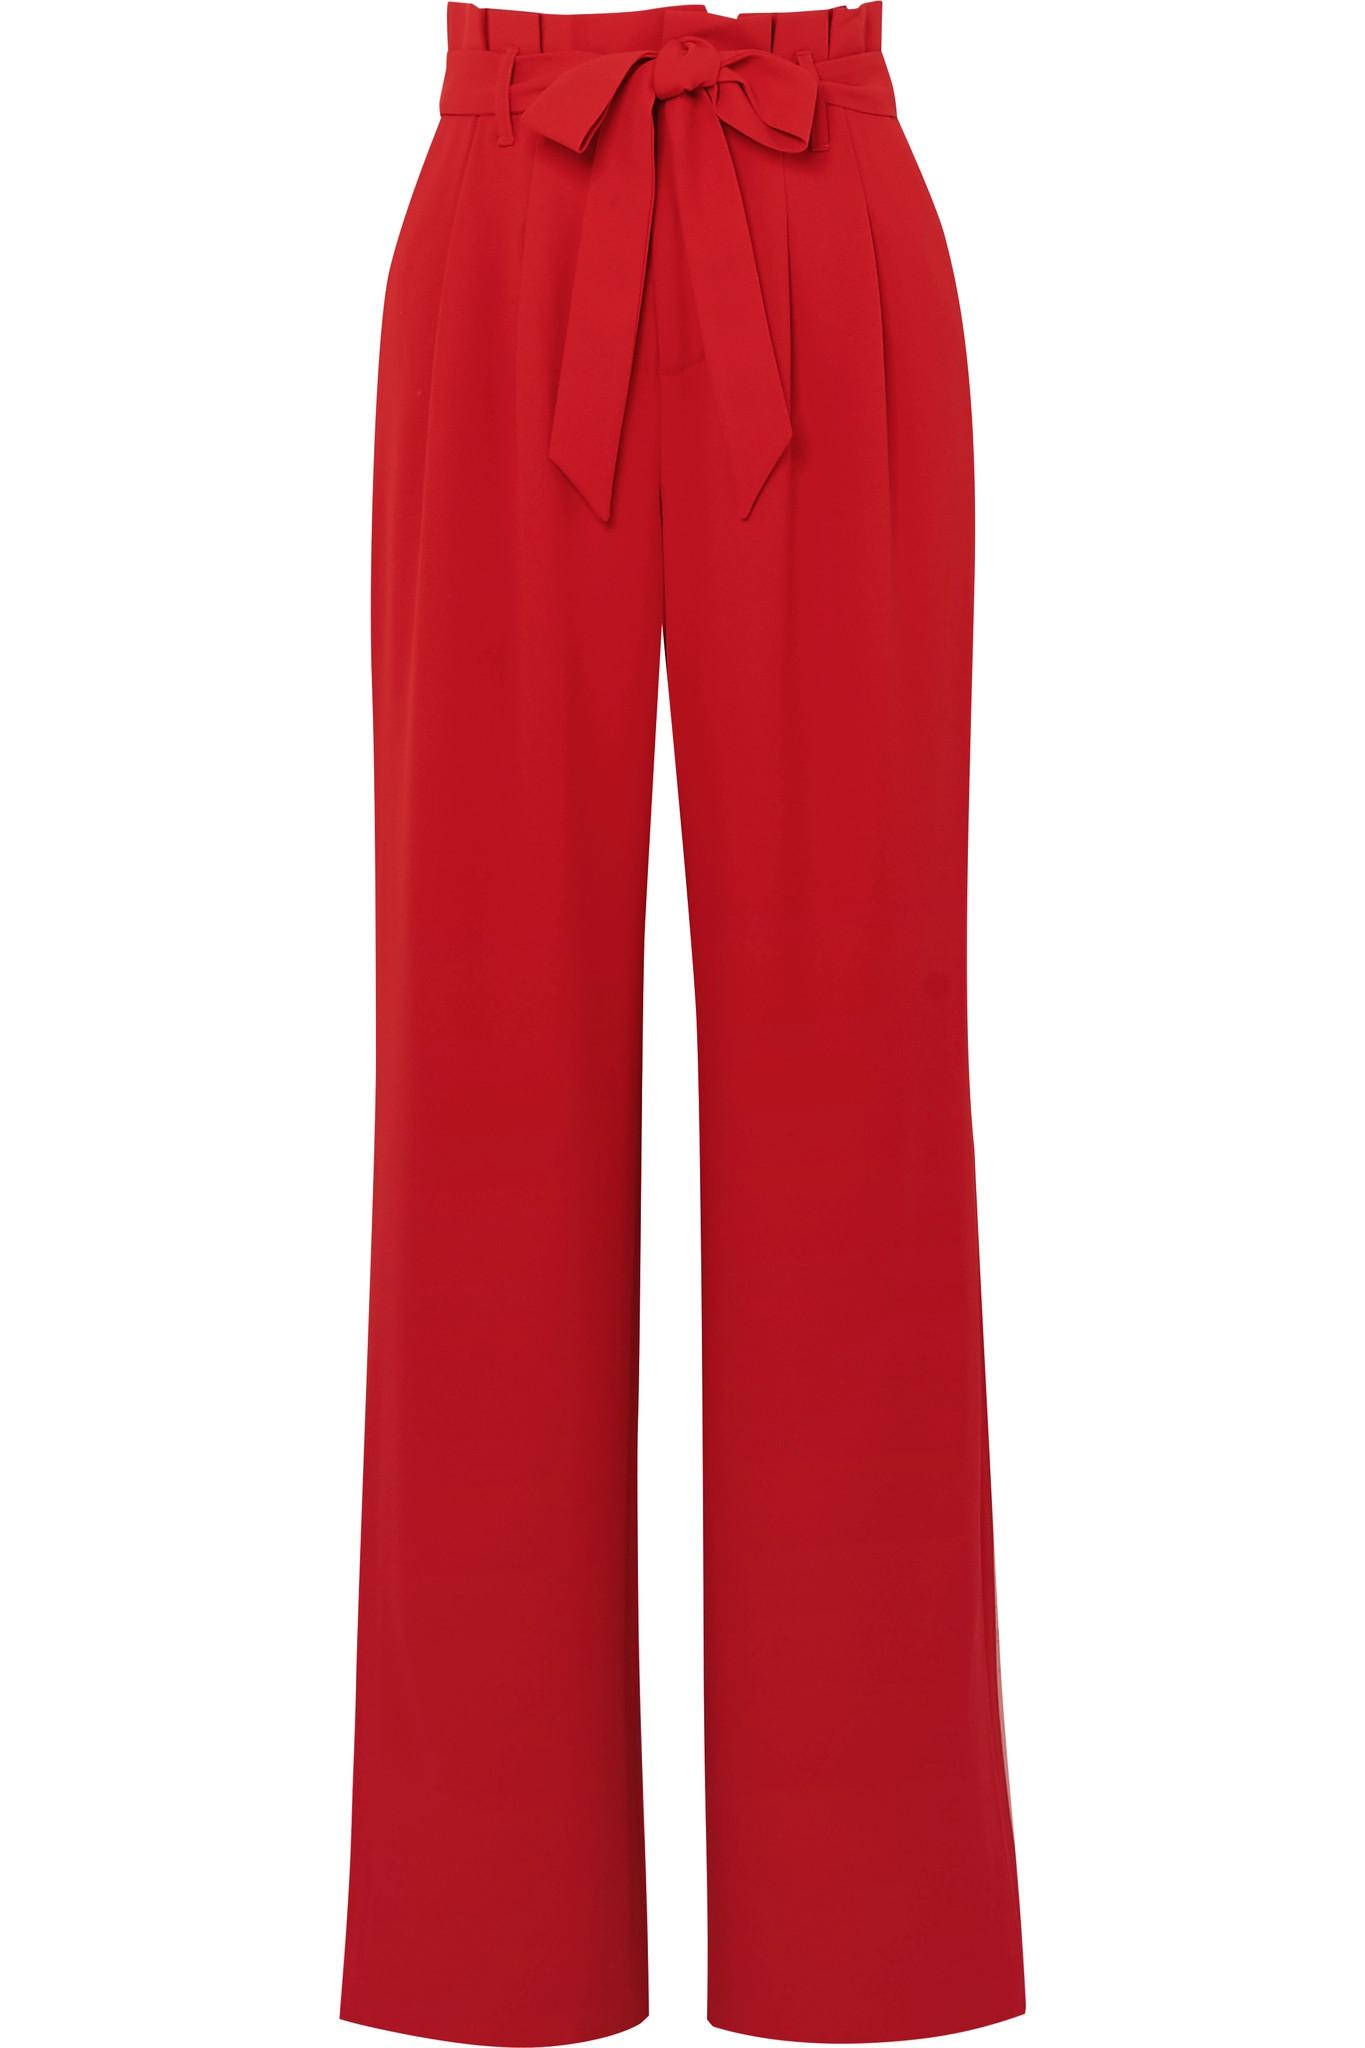 Lyst - Alice + Olivia Farrel Belted Crepe Wide-leg Pants in Red